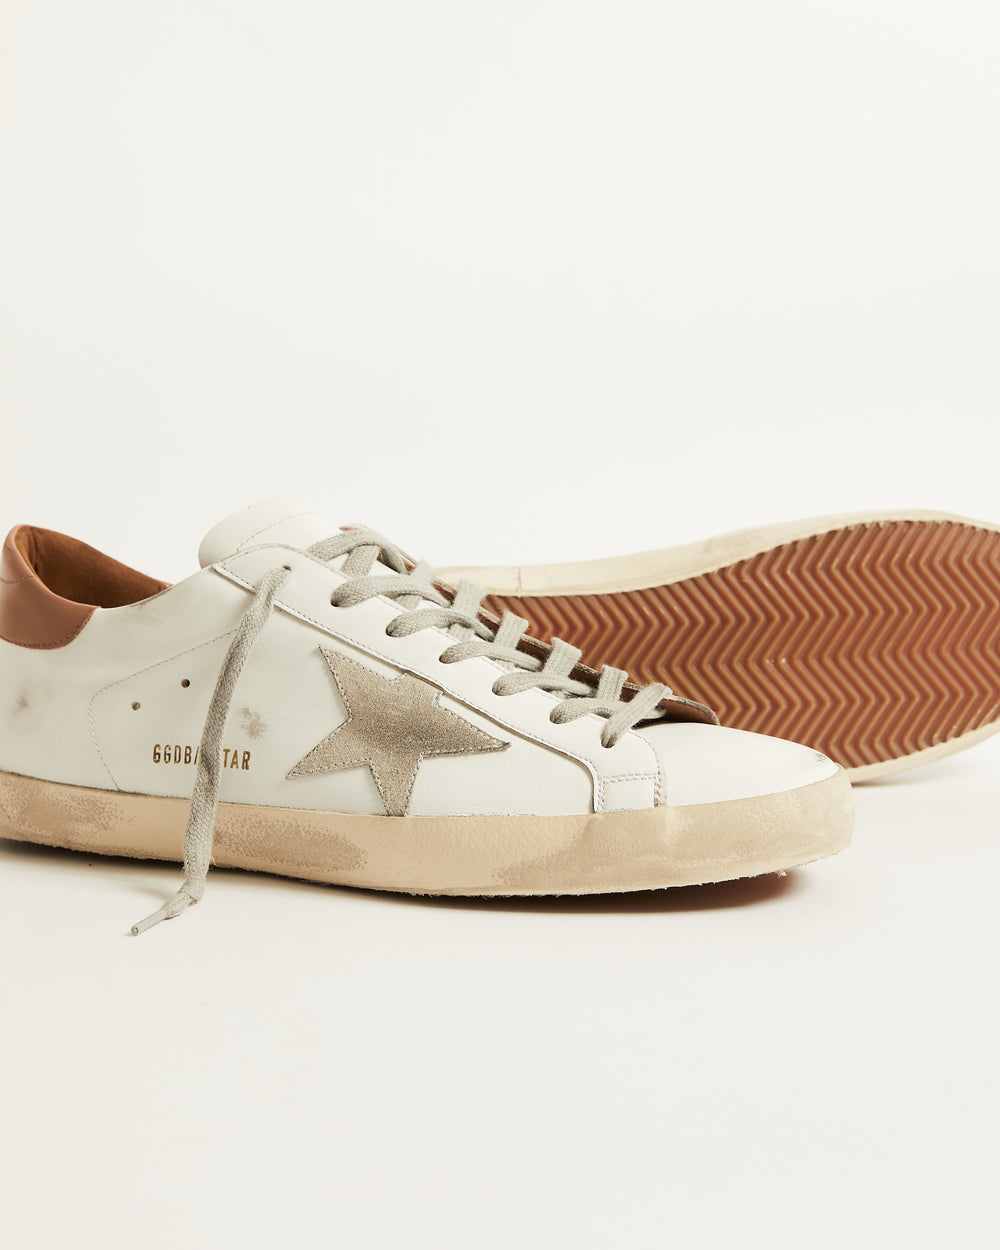 Super Star in White Leather w/ Suede Star and Light Brown Heel